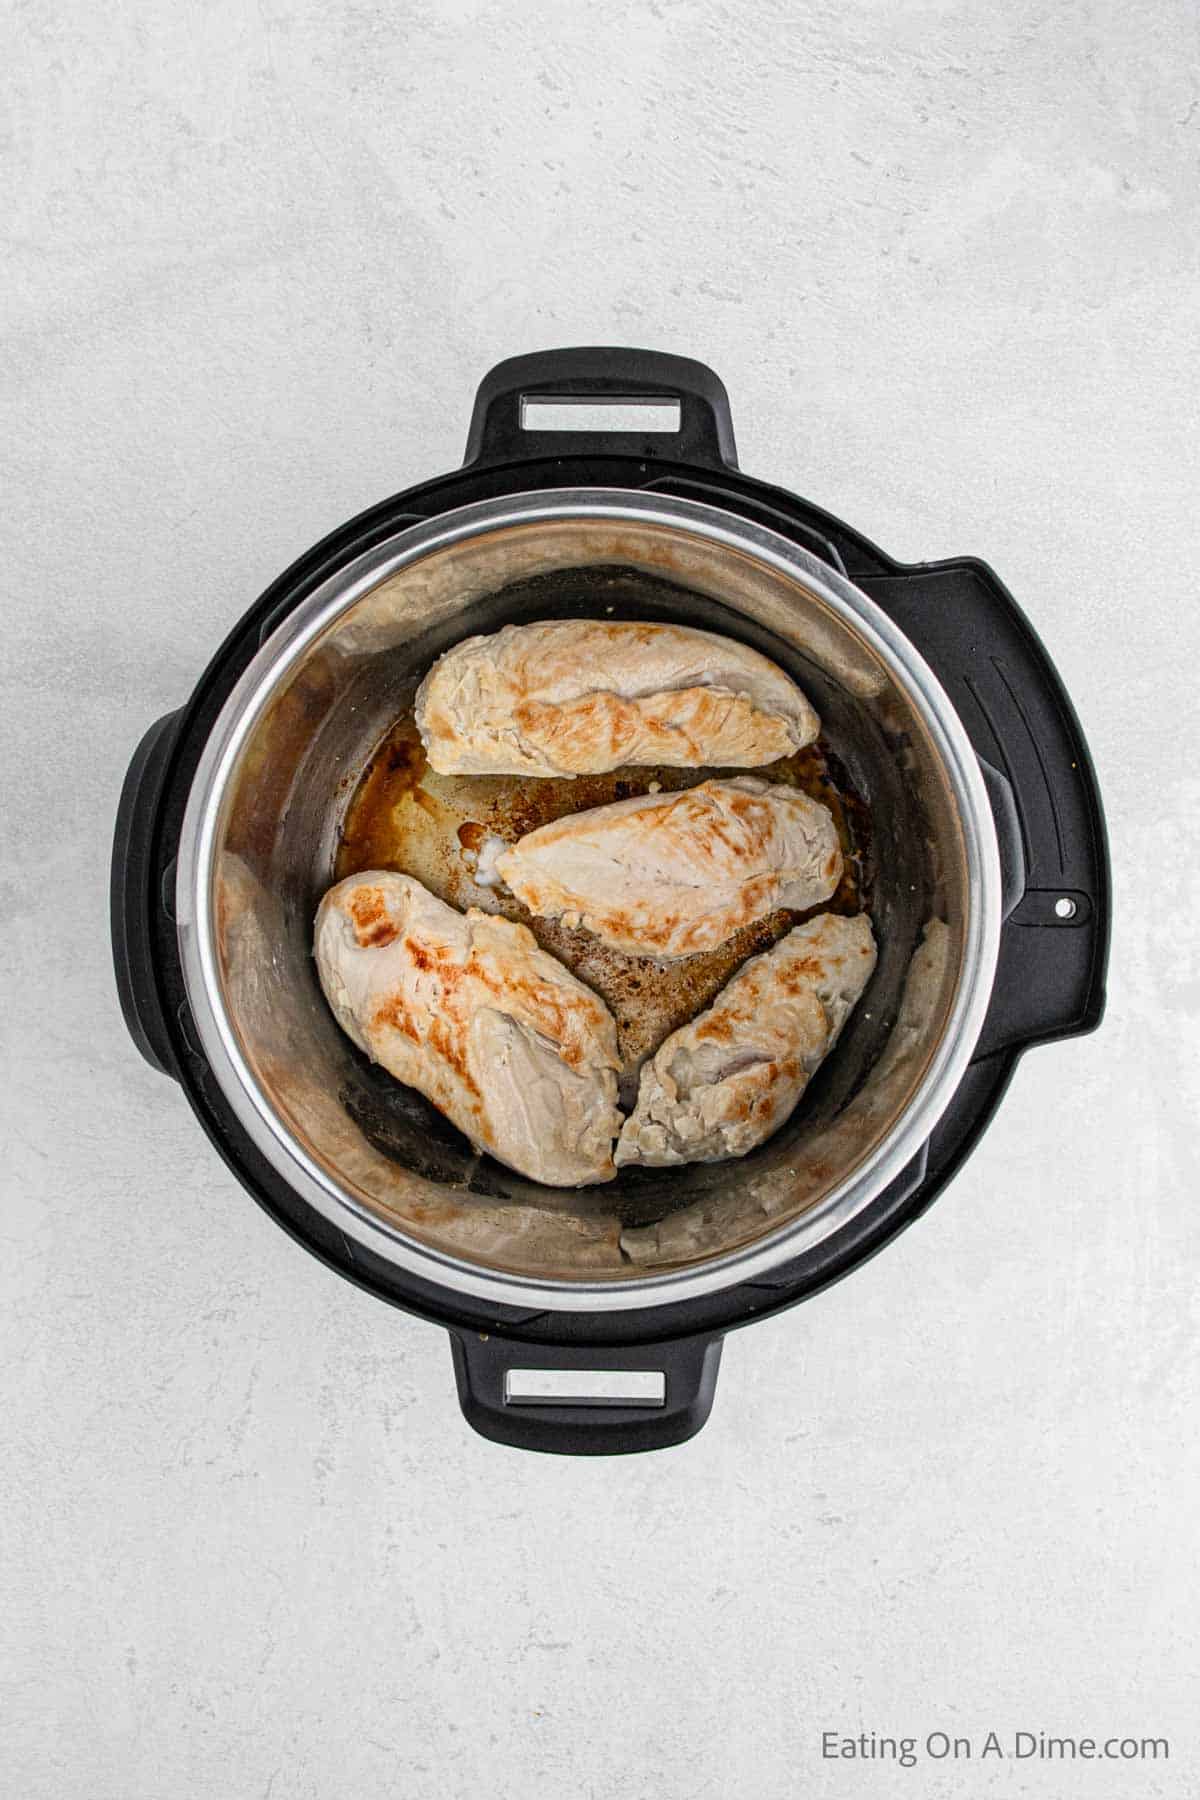 Browning chicken in the instant pot